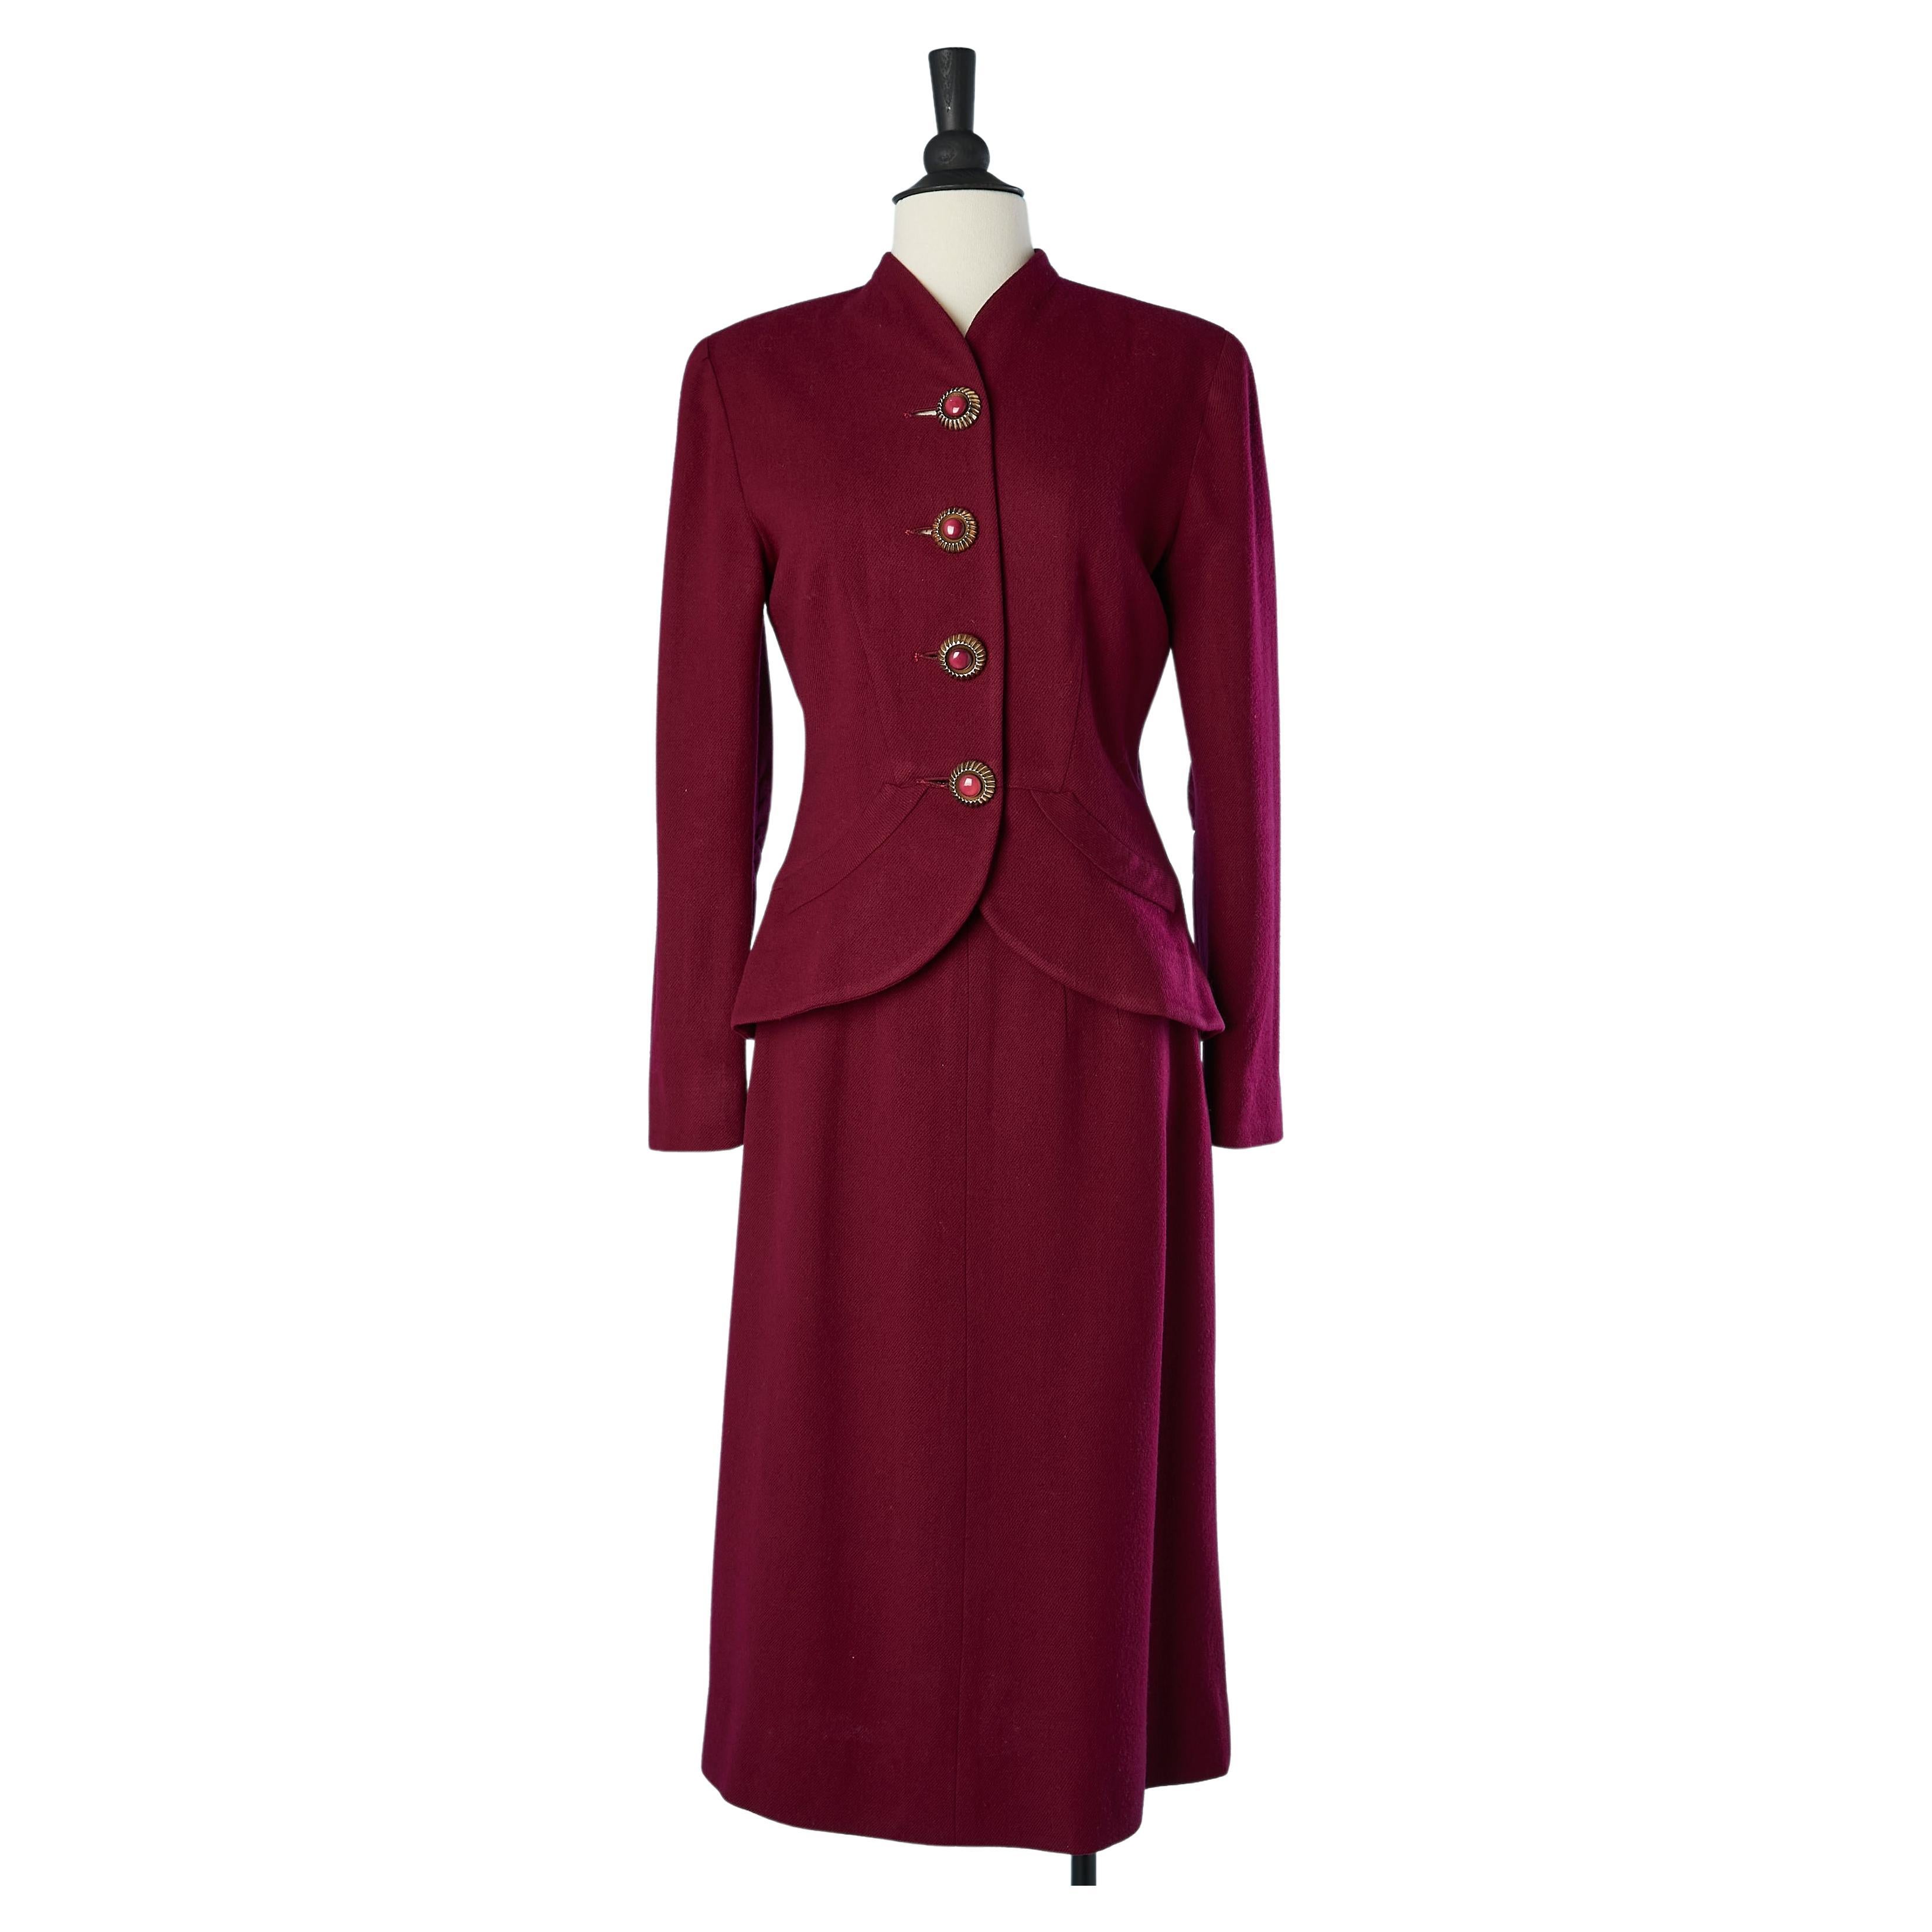 Burgundy skirt-suit in wool with jewellery buttons Circa 1940/50